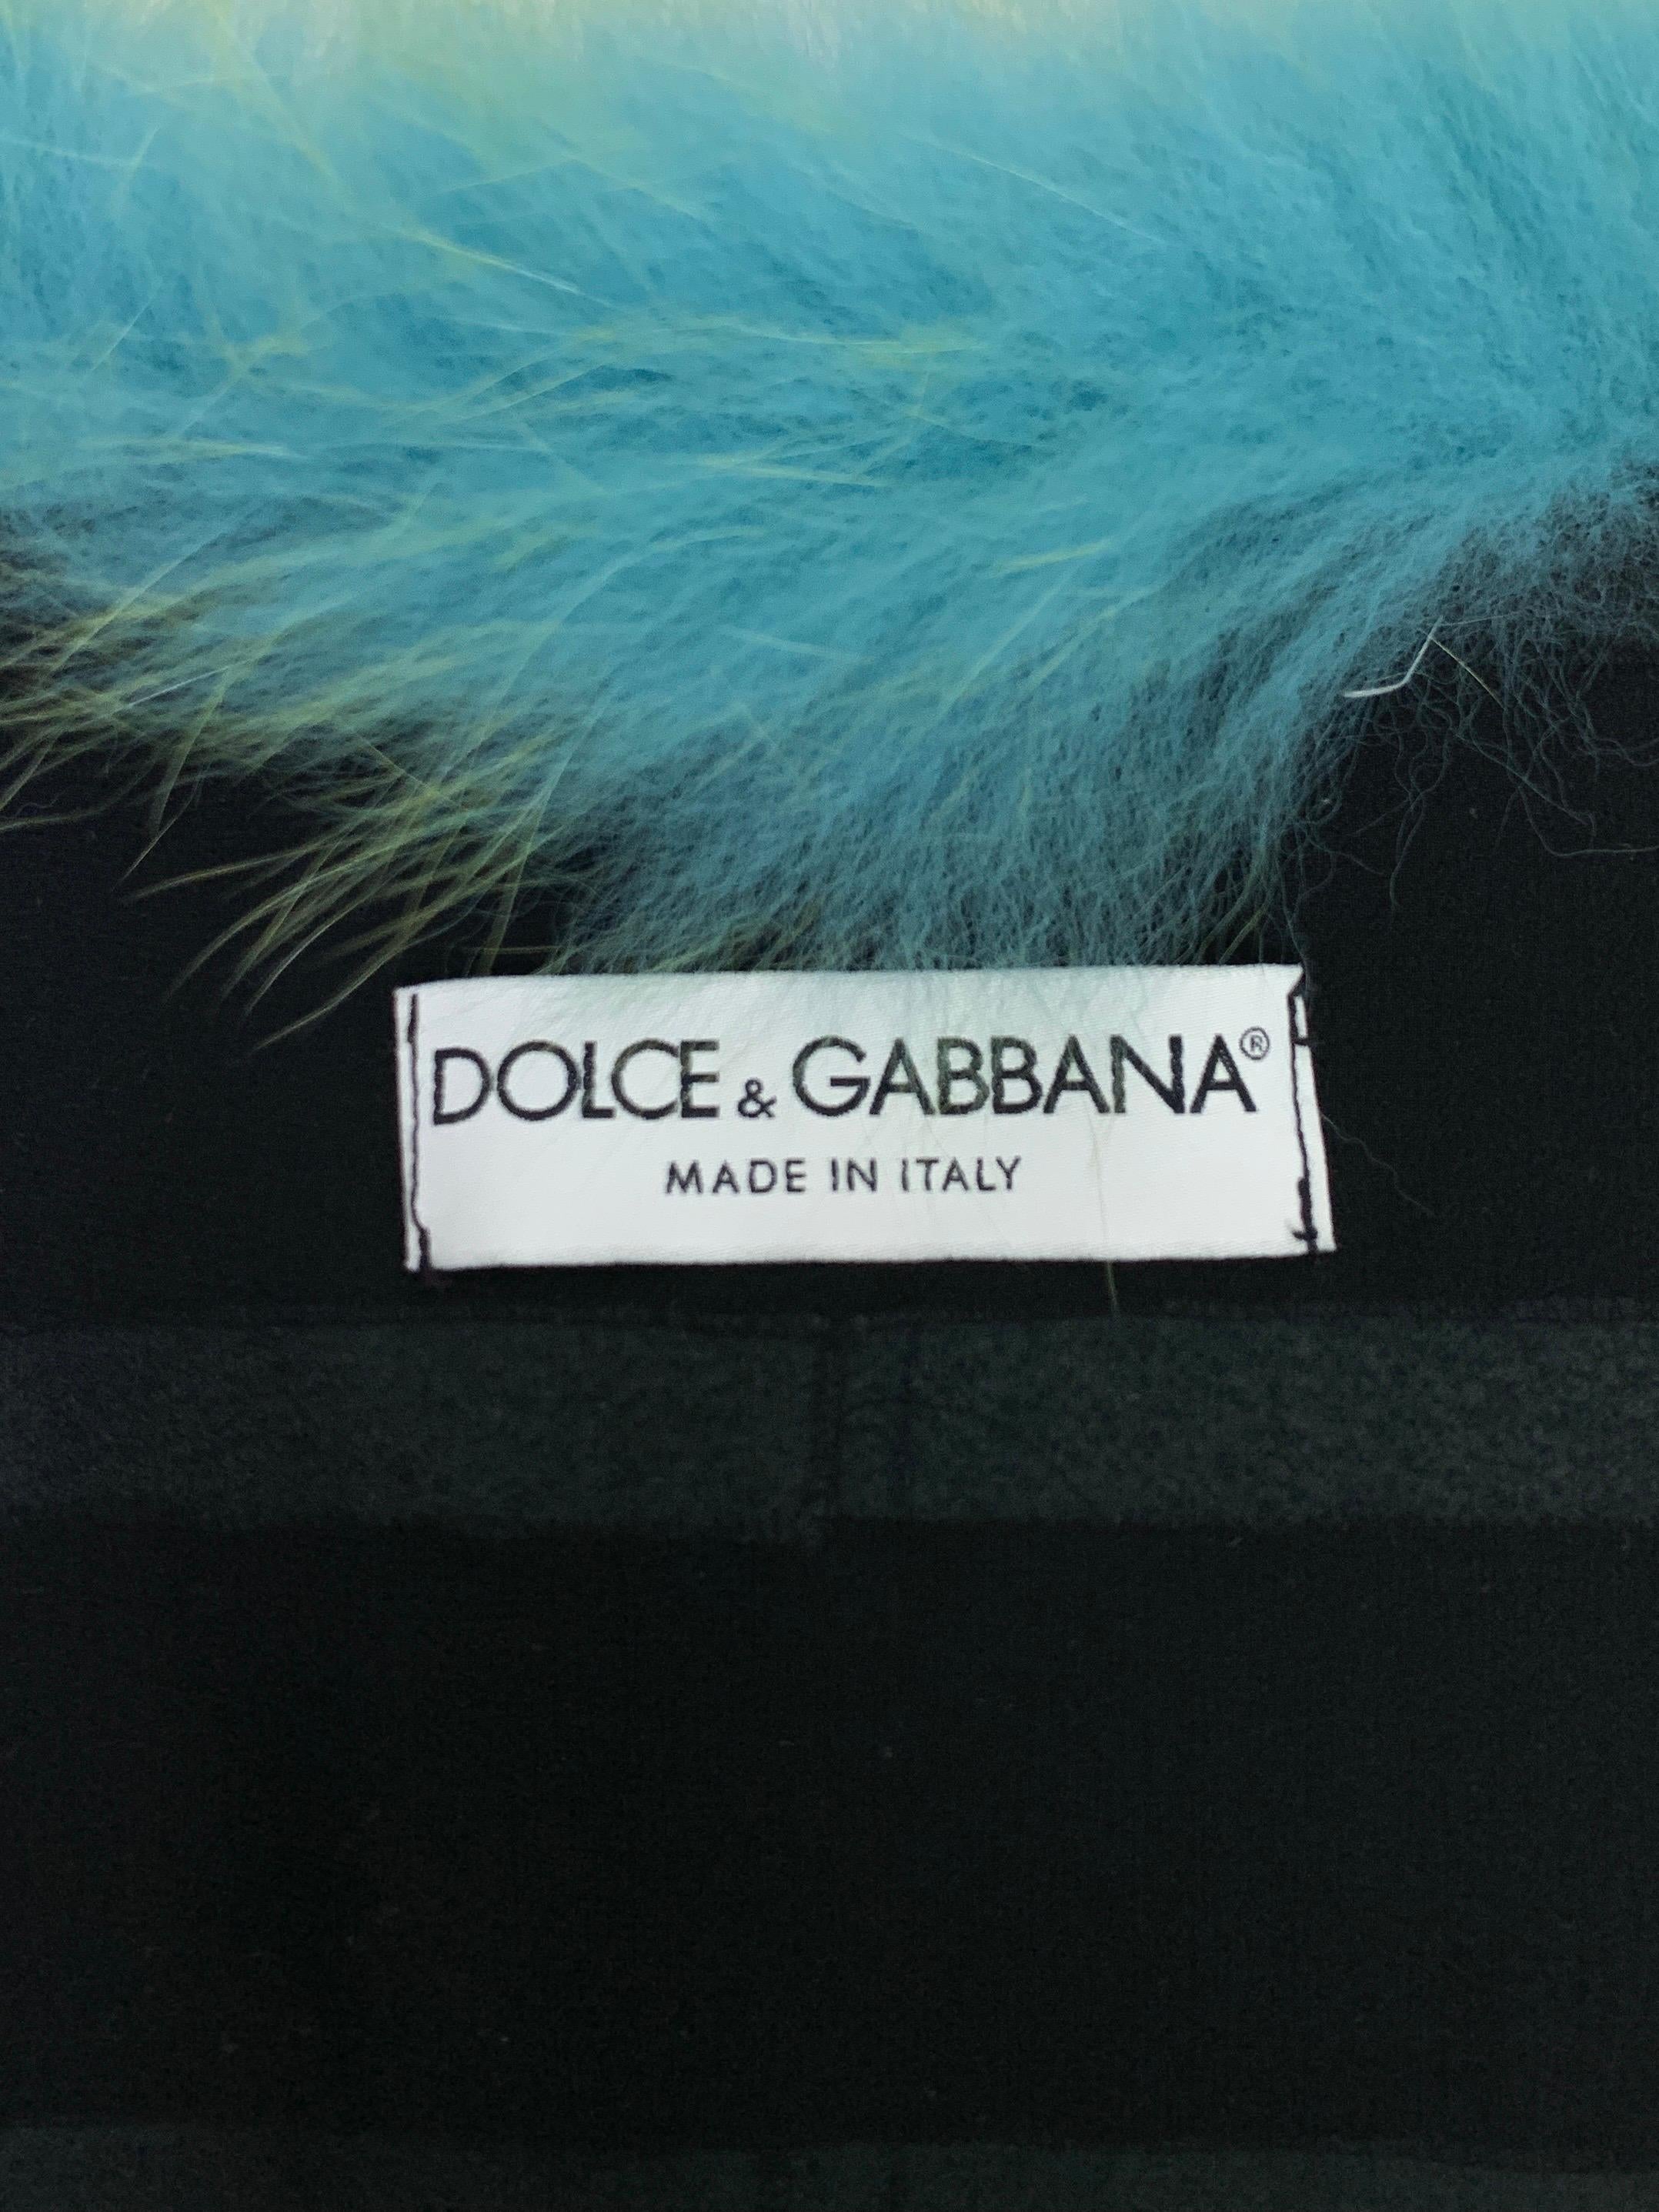 Dolce & Gabbana Fall 1999 Fox Fur Jacket In Excellent Condition For Sale In Prague, CZ